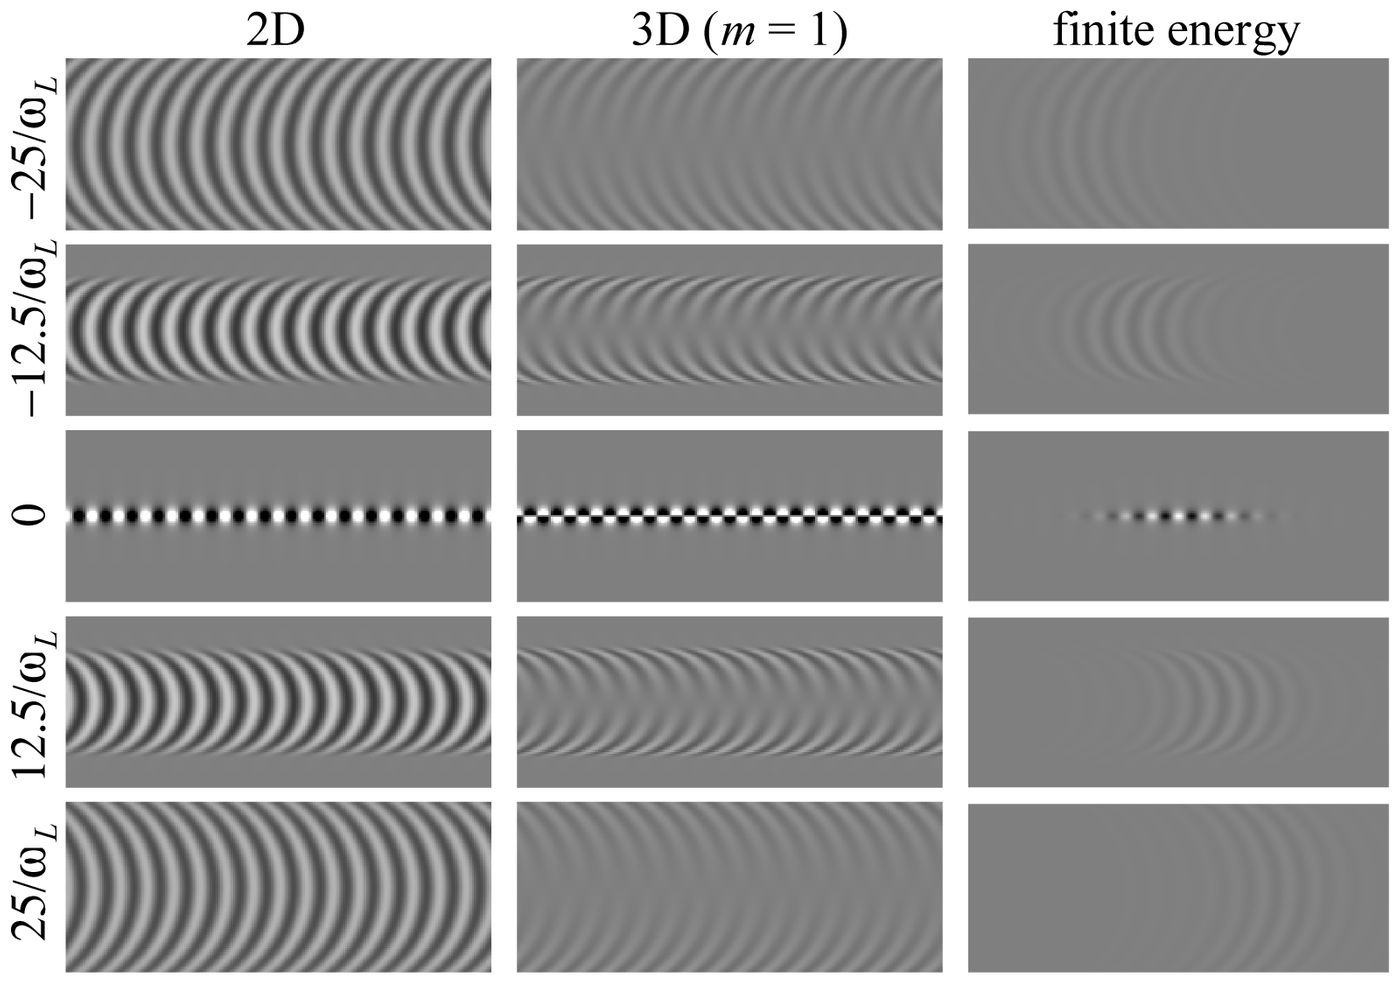 Real part of the pulses for (left) two dimensions, (middle) three dimensions with unit vorticity, and (right) the three-dimensional pulses, at five different times. (https://doi.org/10.1364/OE.24.028669)